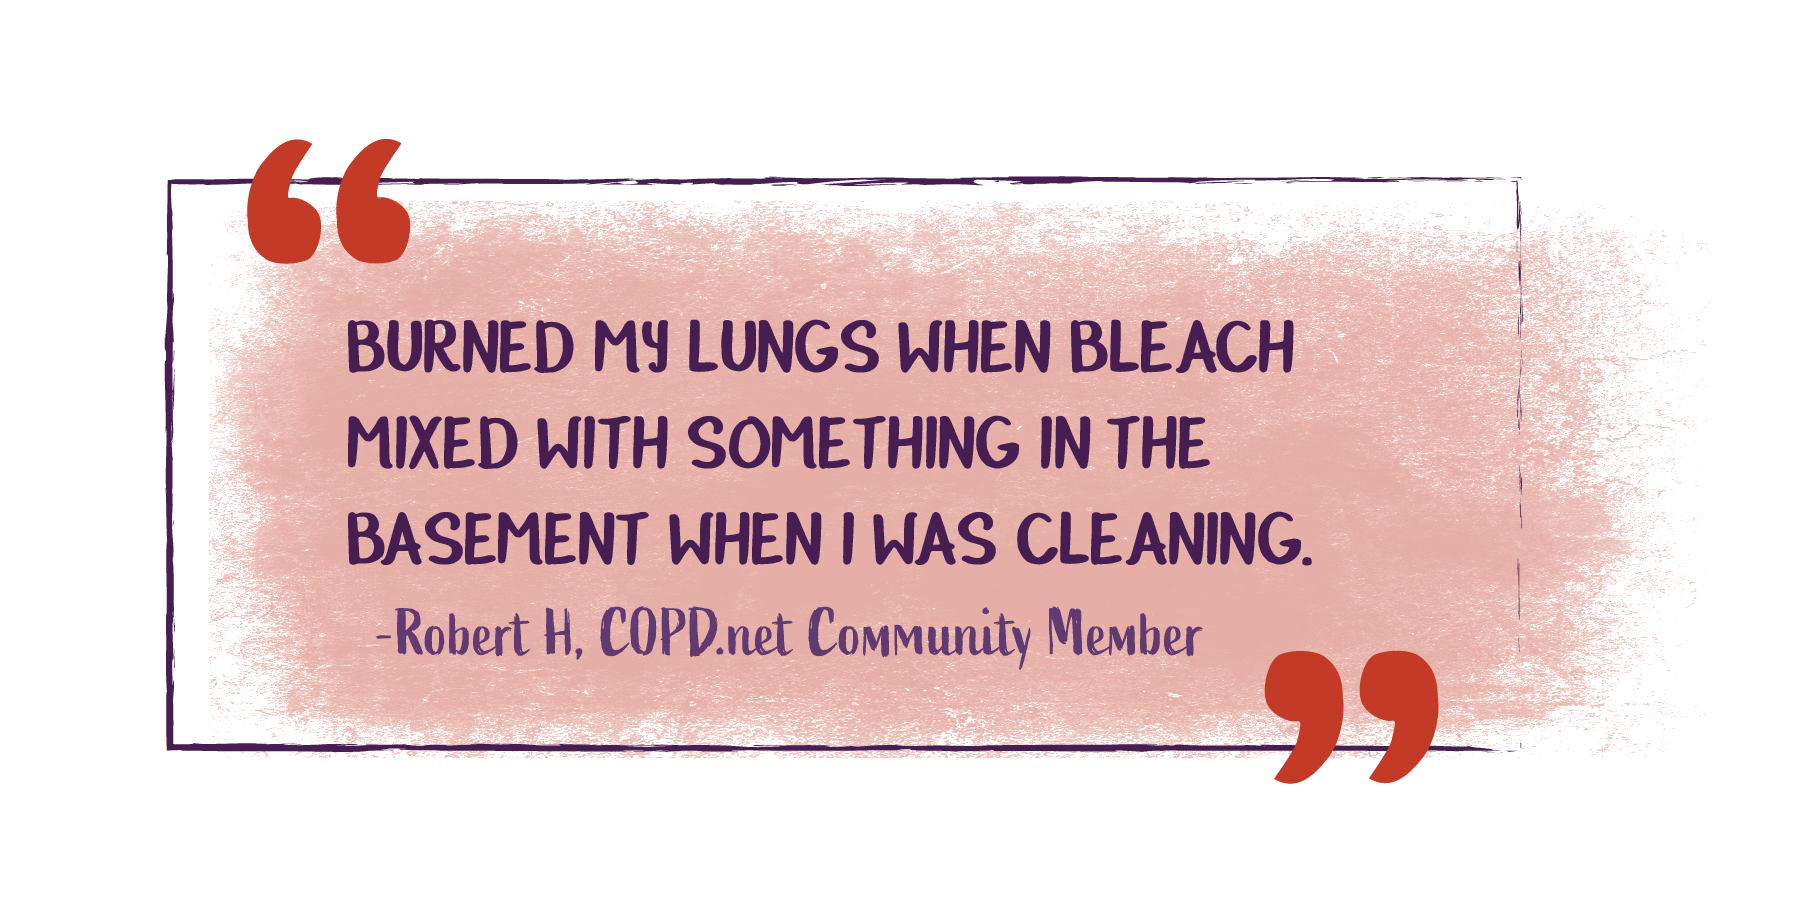 Burned my lungs when bleach mixed with something in the basement when I was cleaning. James H, COPD.net Community Member